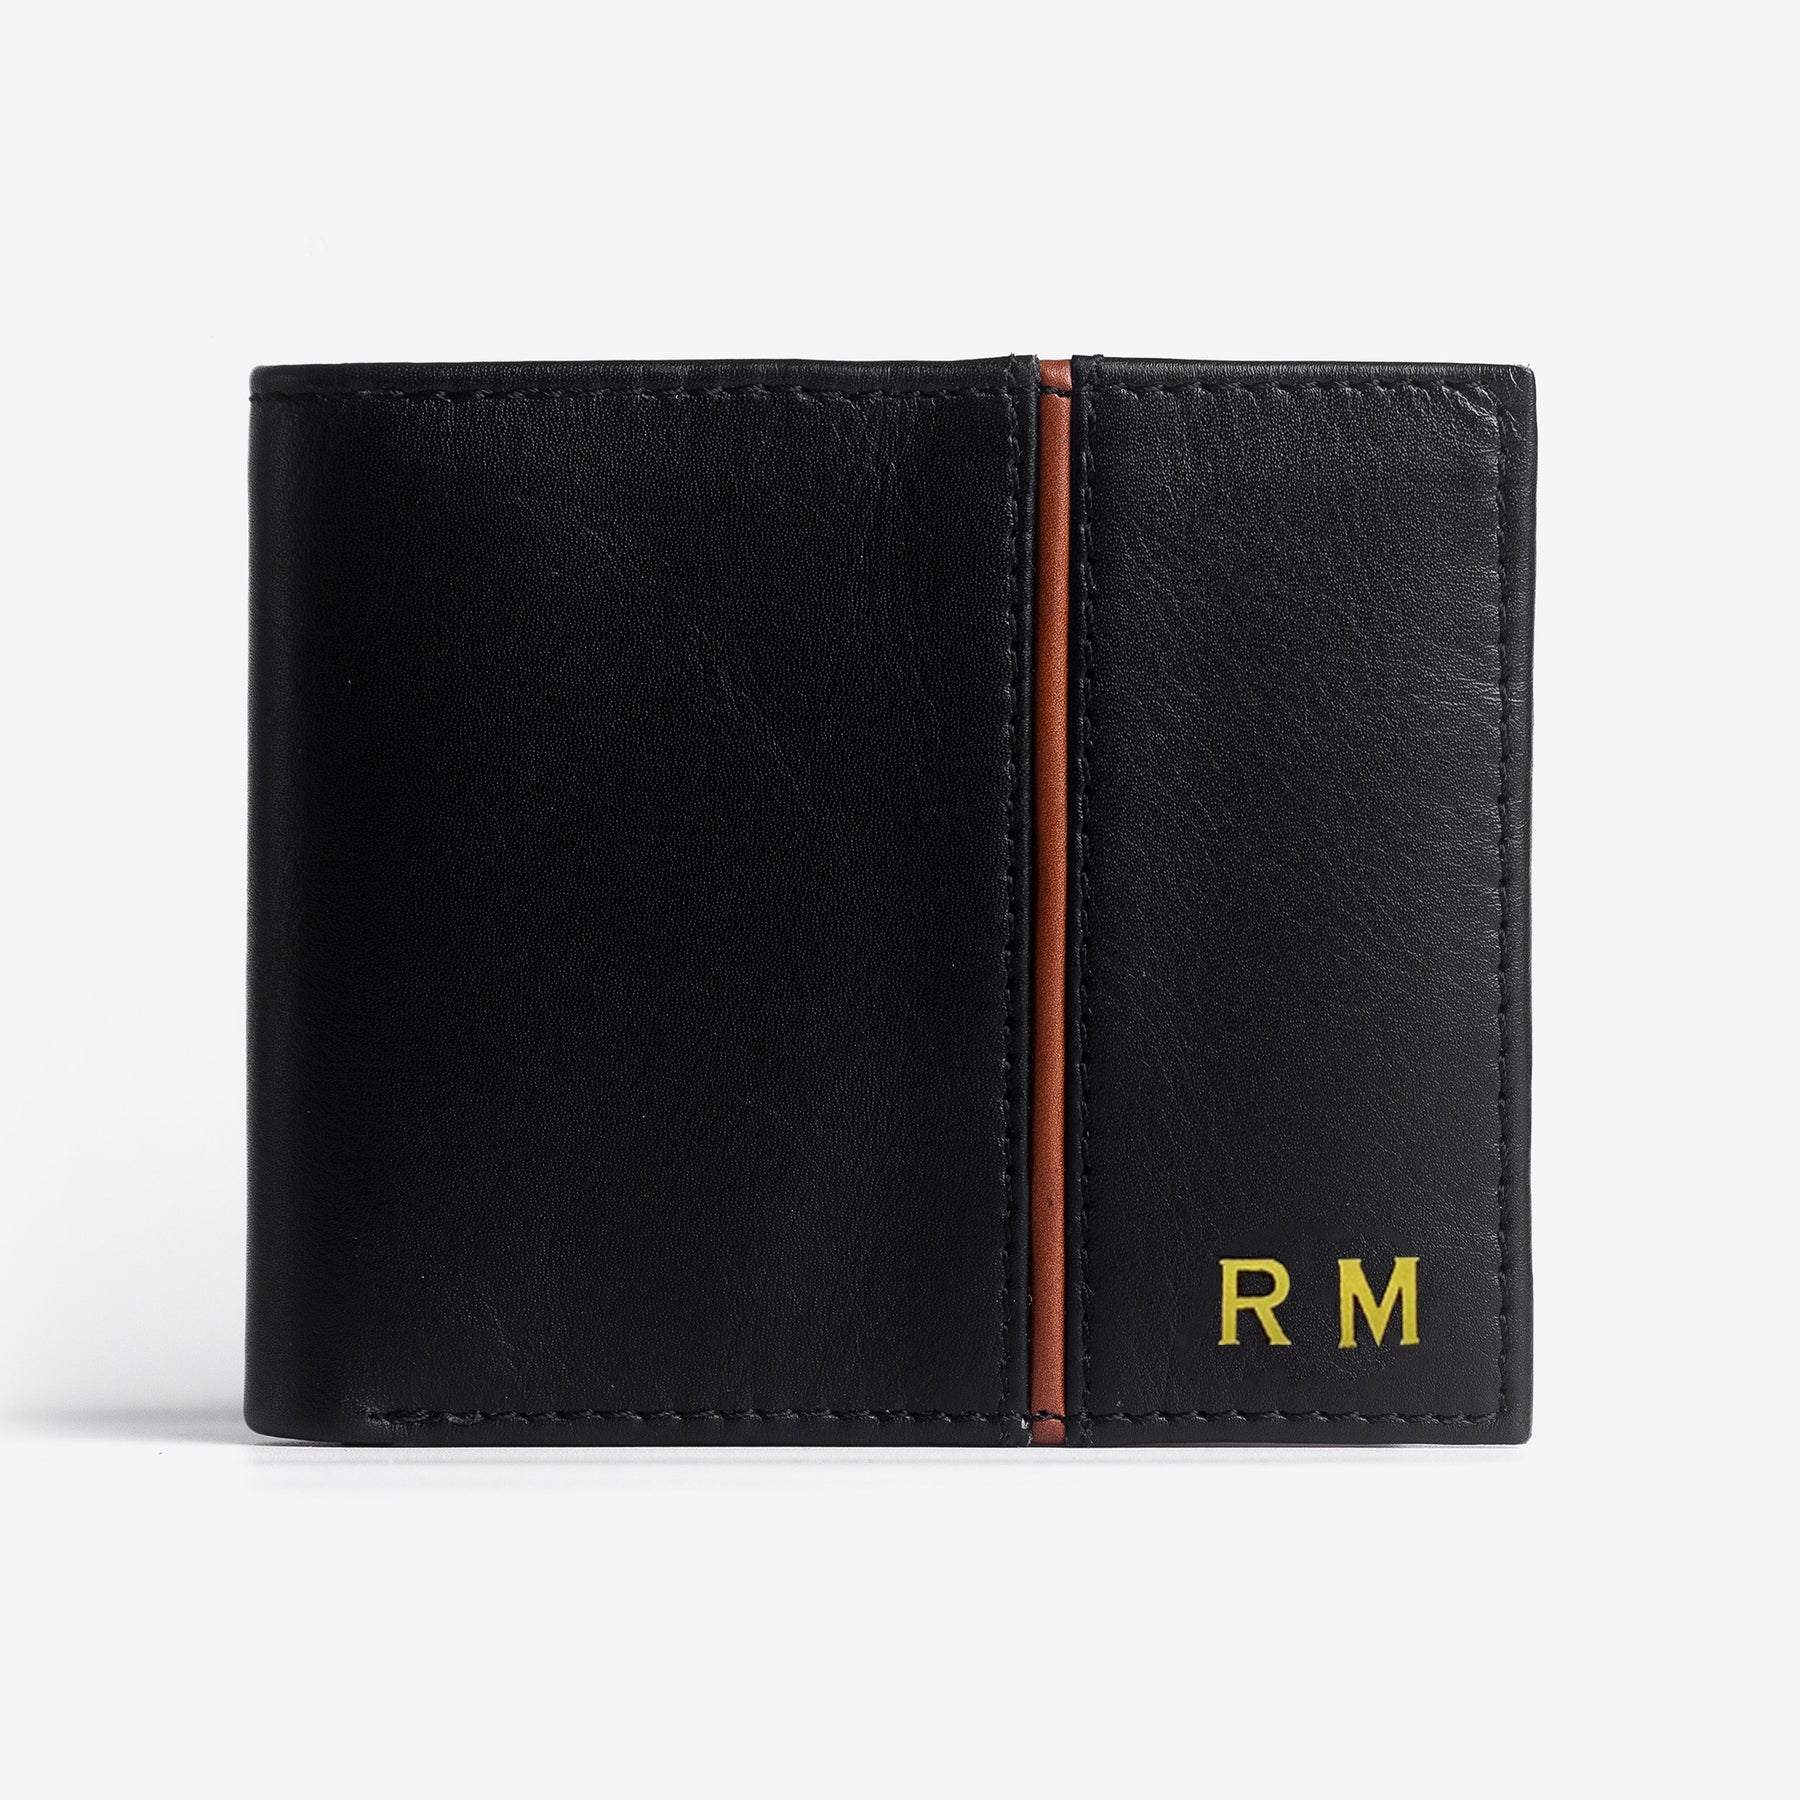 Slim Purse Monogram - Wallets and Small Leather Goods